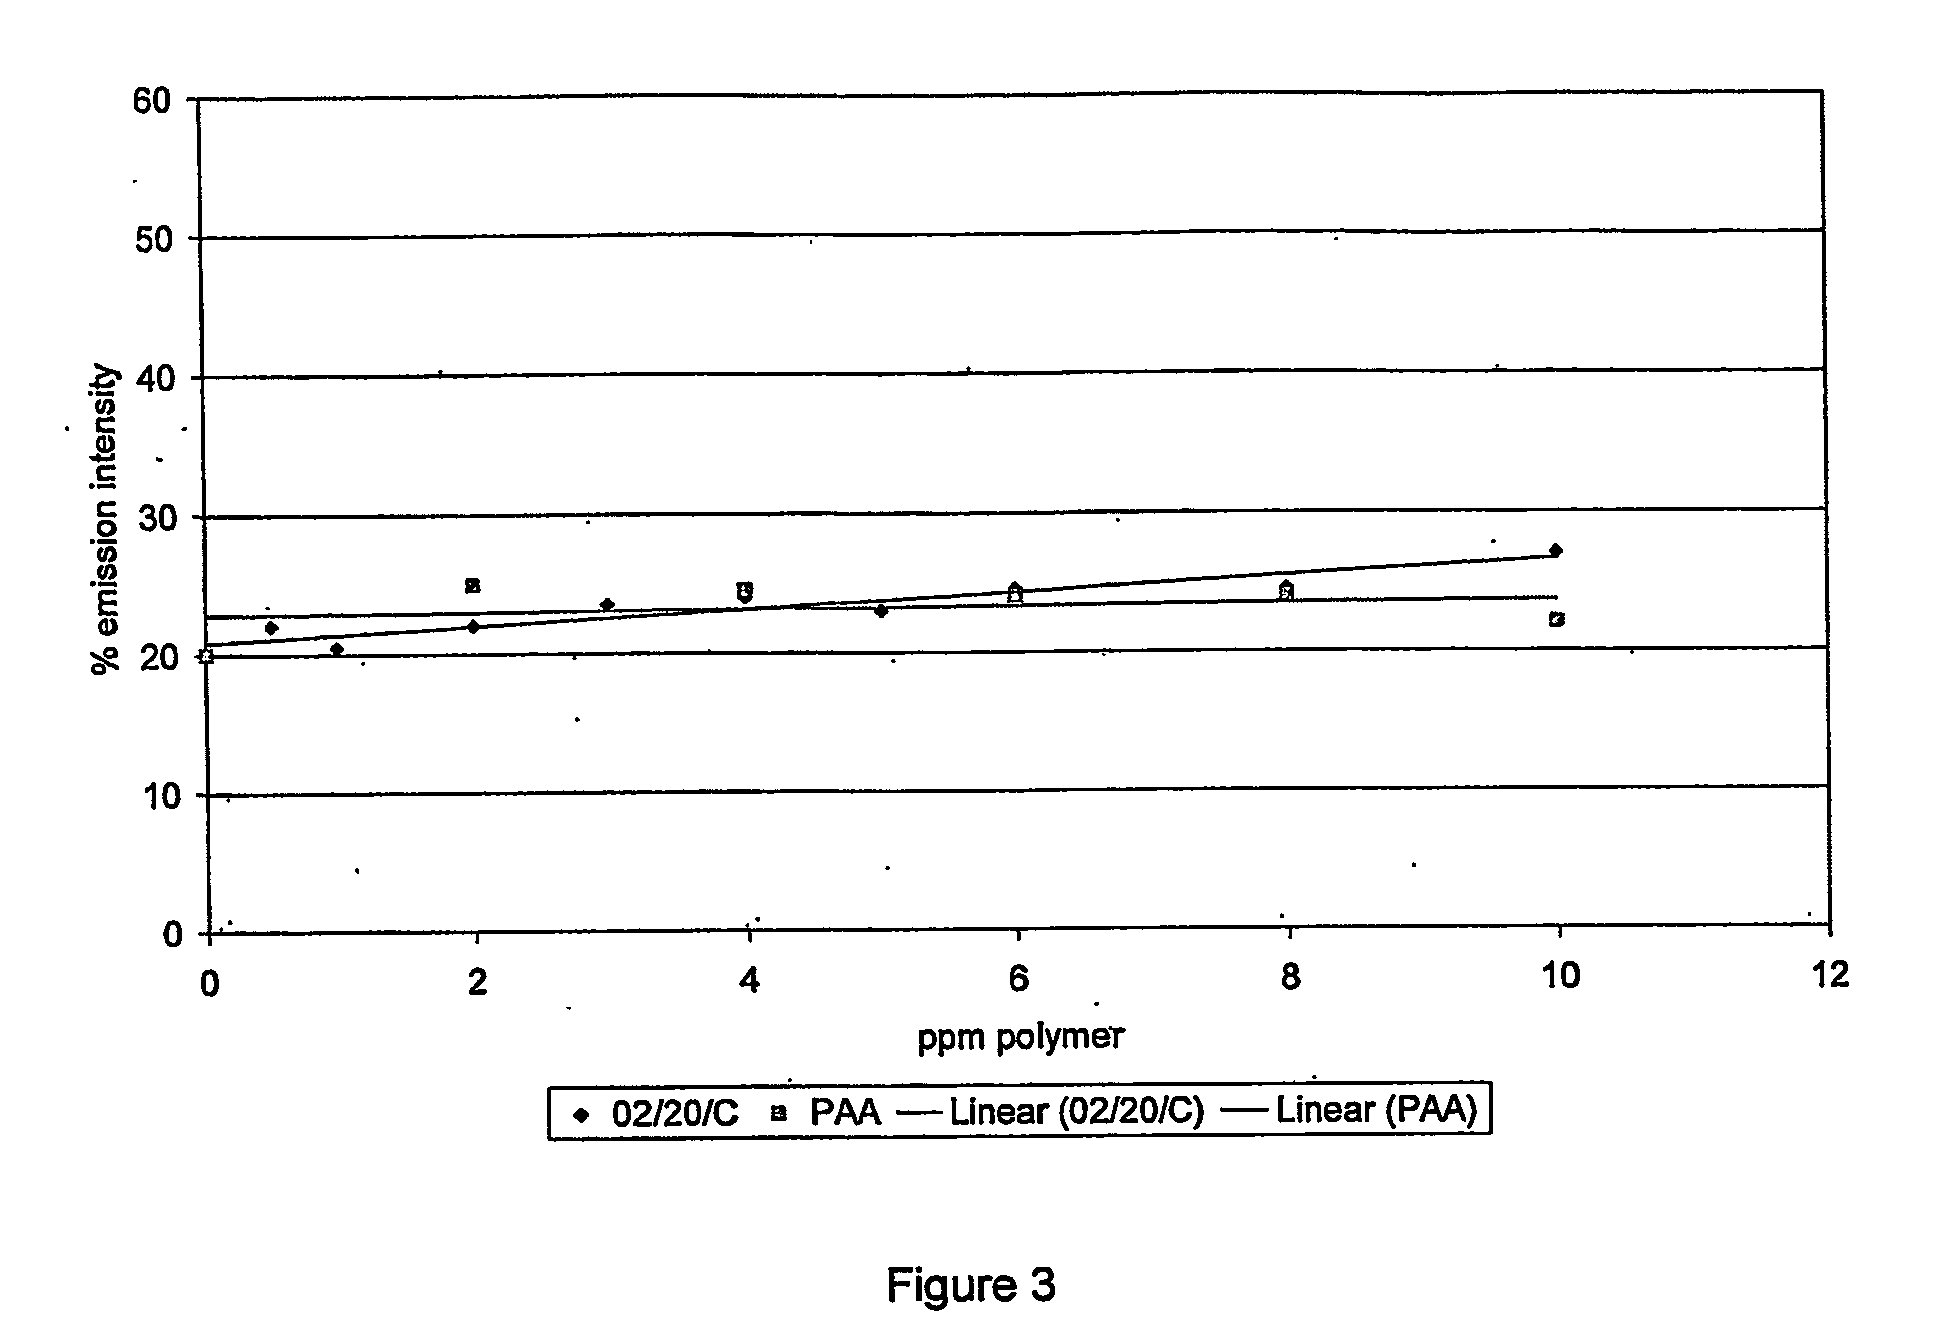 Tagged scale inhibiting polymers, compositions comprised thereof and preventing or controlling scale formation therewith